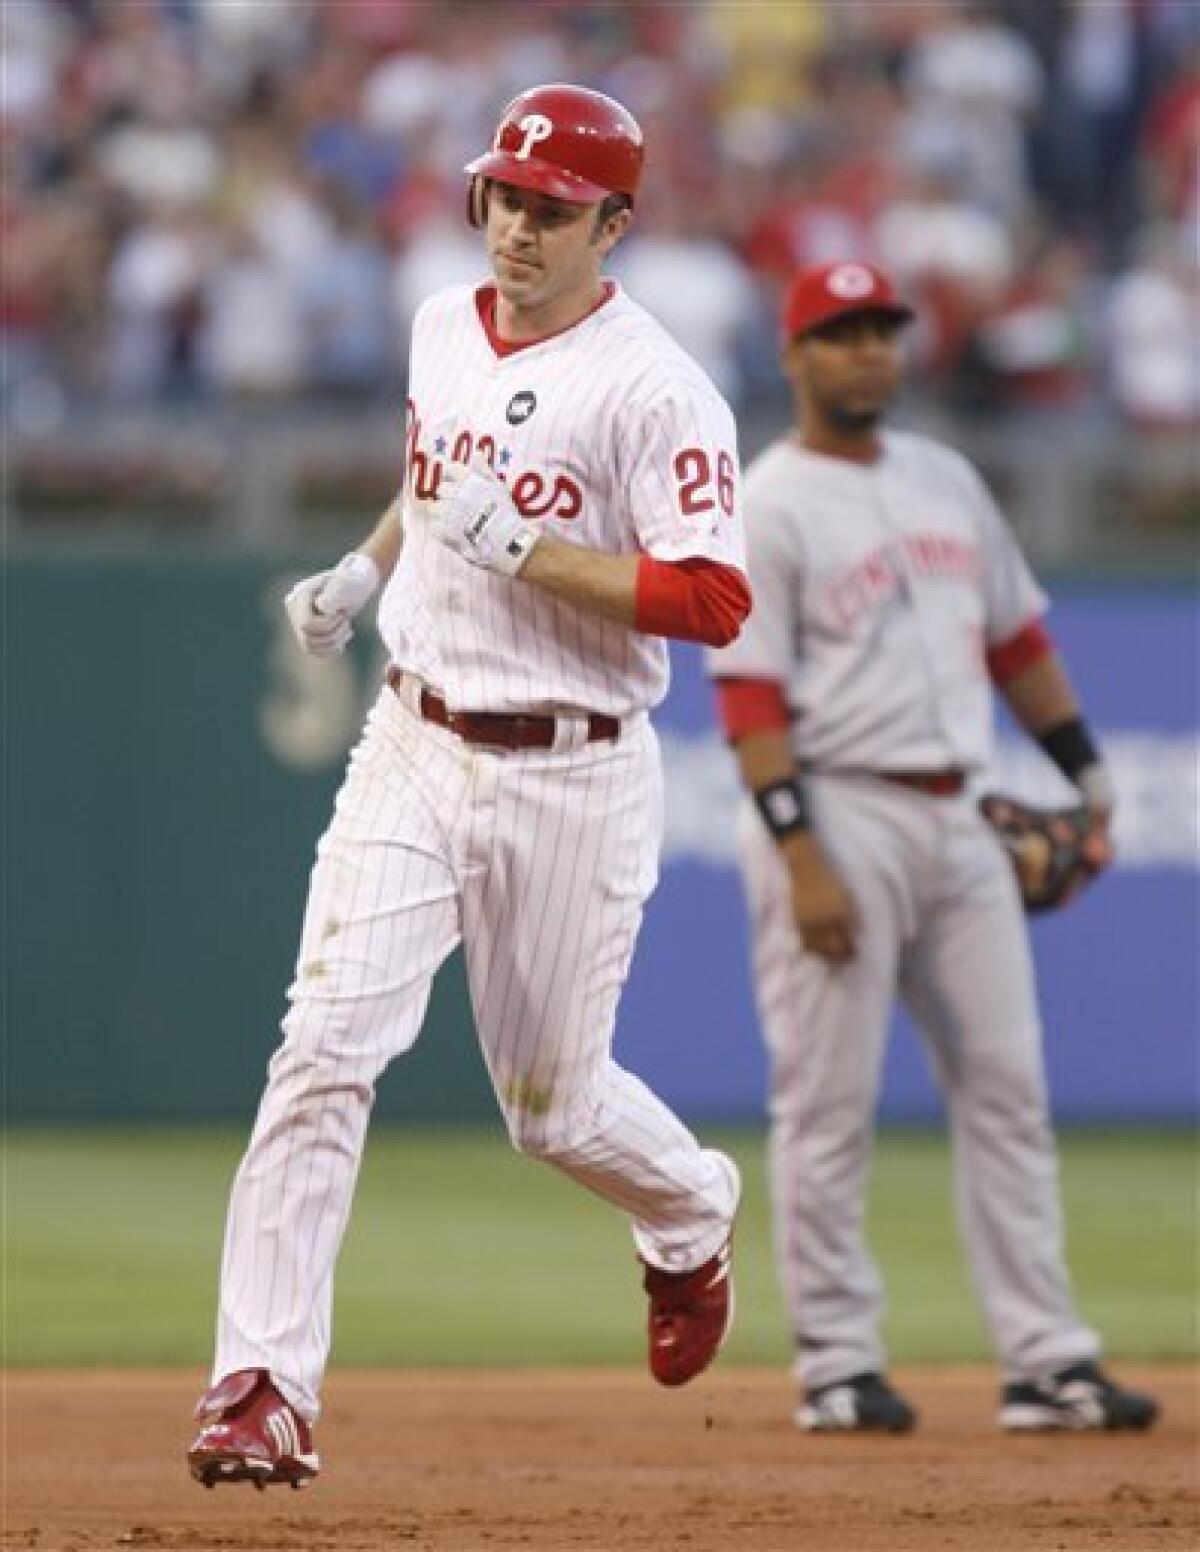 What was the biggest home run of Chase Utley's Phillies career